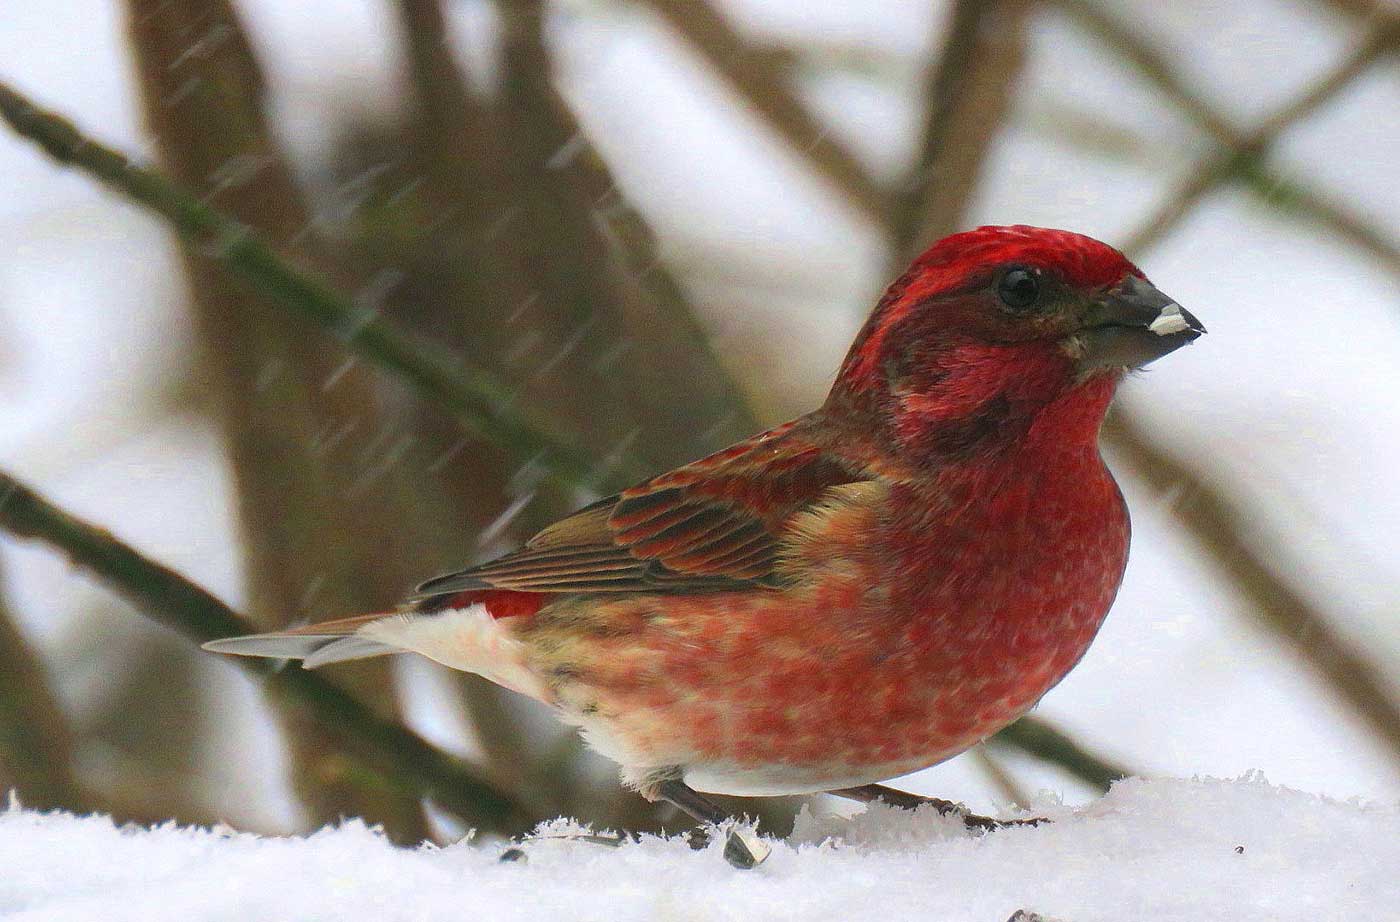 Purple Finch standing on snow in snowstorm